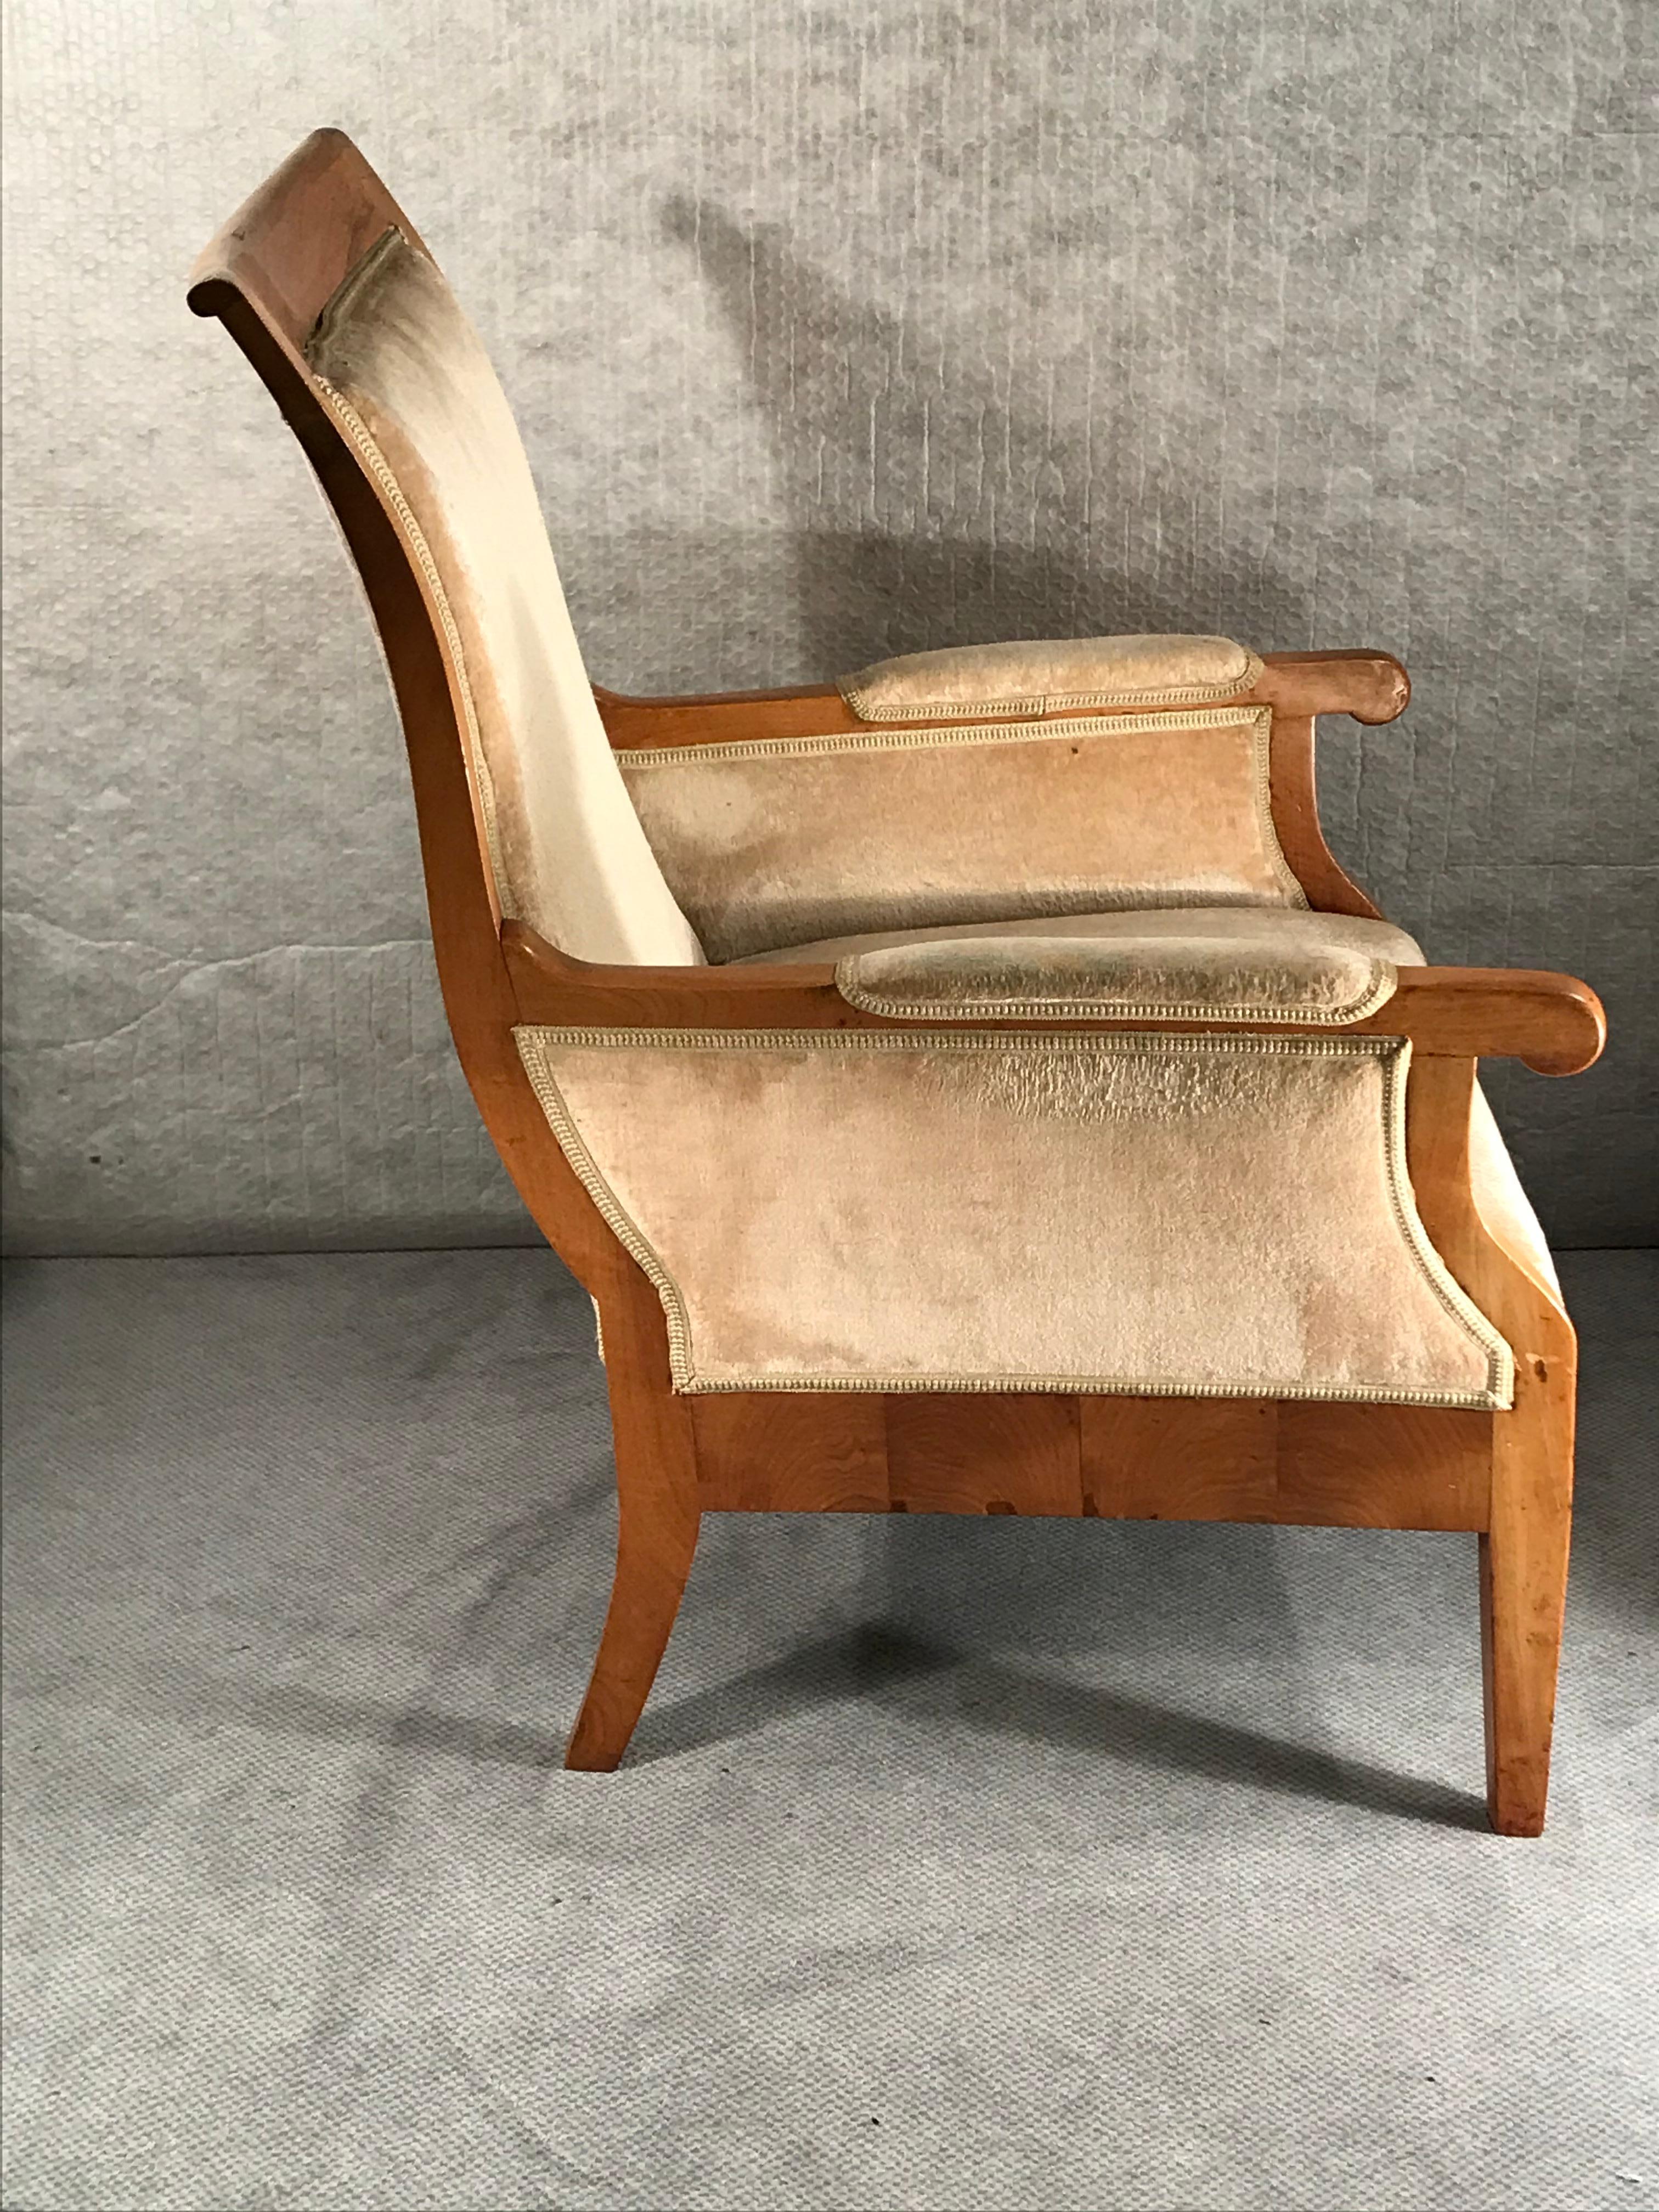 Biedermeier armchair with ottoman, South Germany, 1820. Very comfortable armchair with walnut veneer frame and matching ottoman. The size of the ottoman is: 22.83 x 16.92 x 16.92 inches (58 x 43 x 43 cm).
The chair is in original condition. The